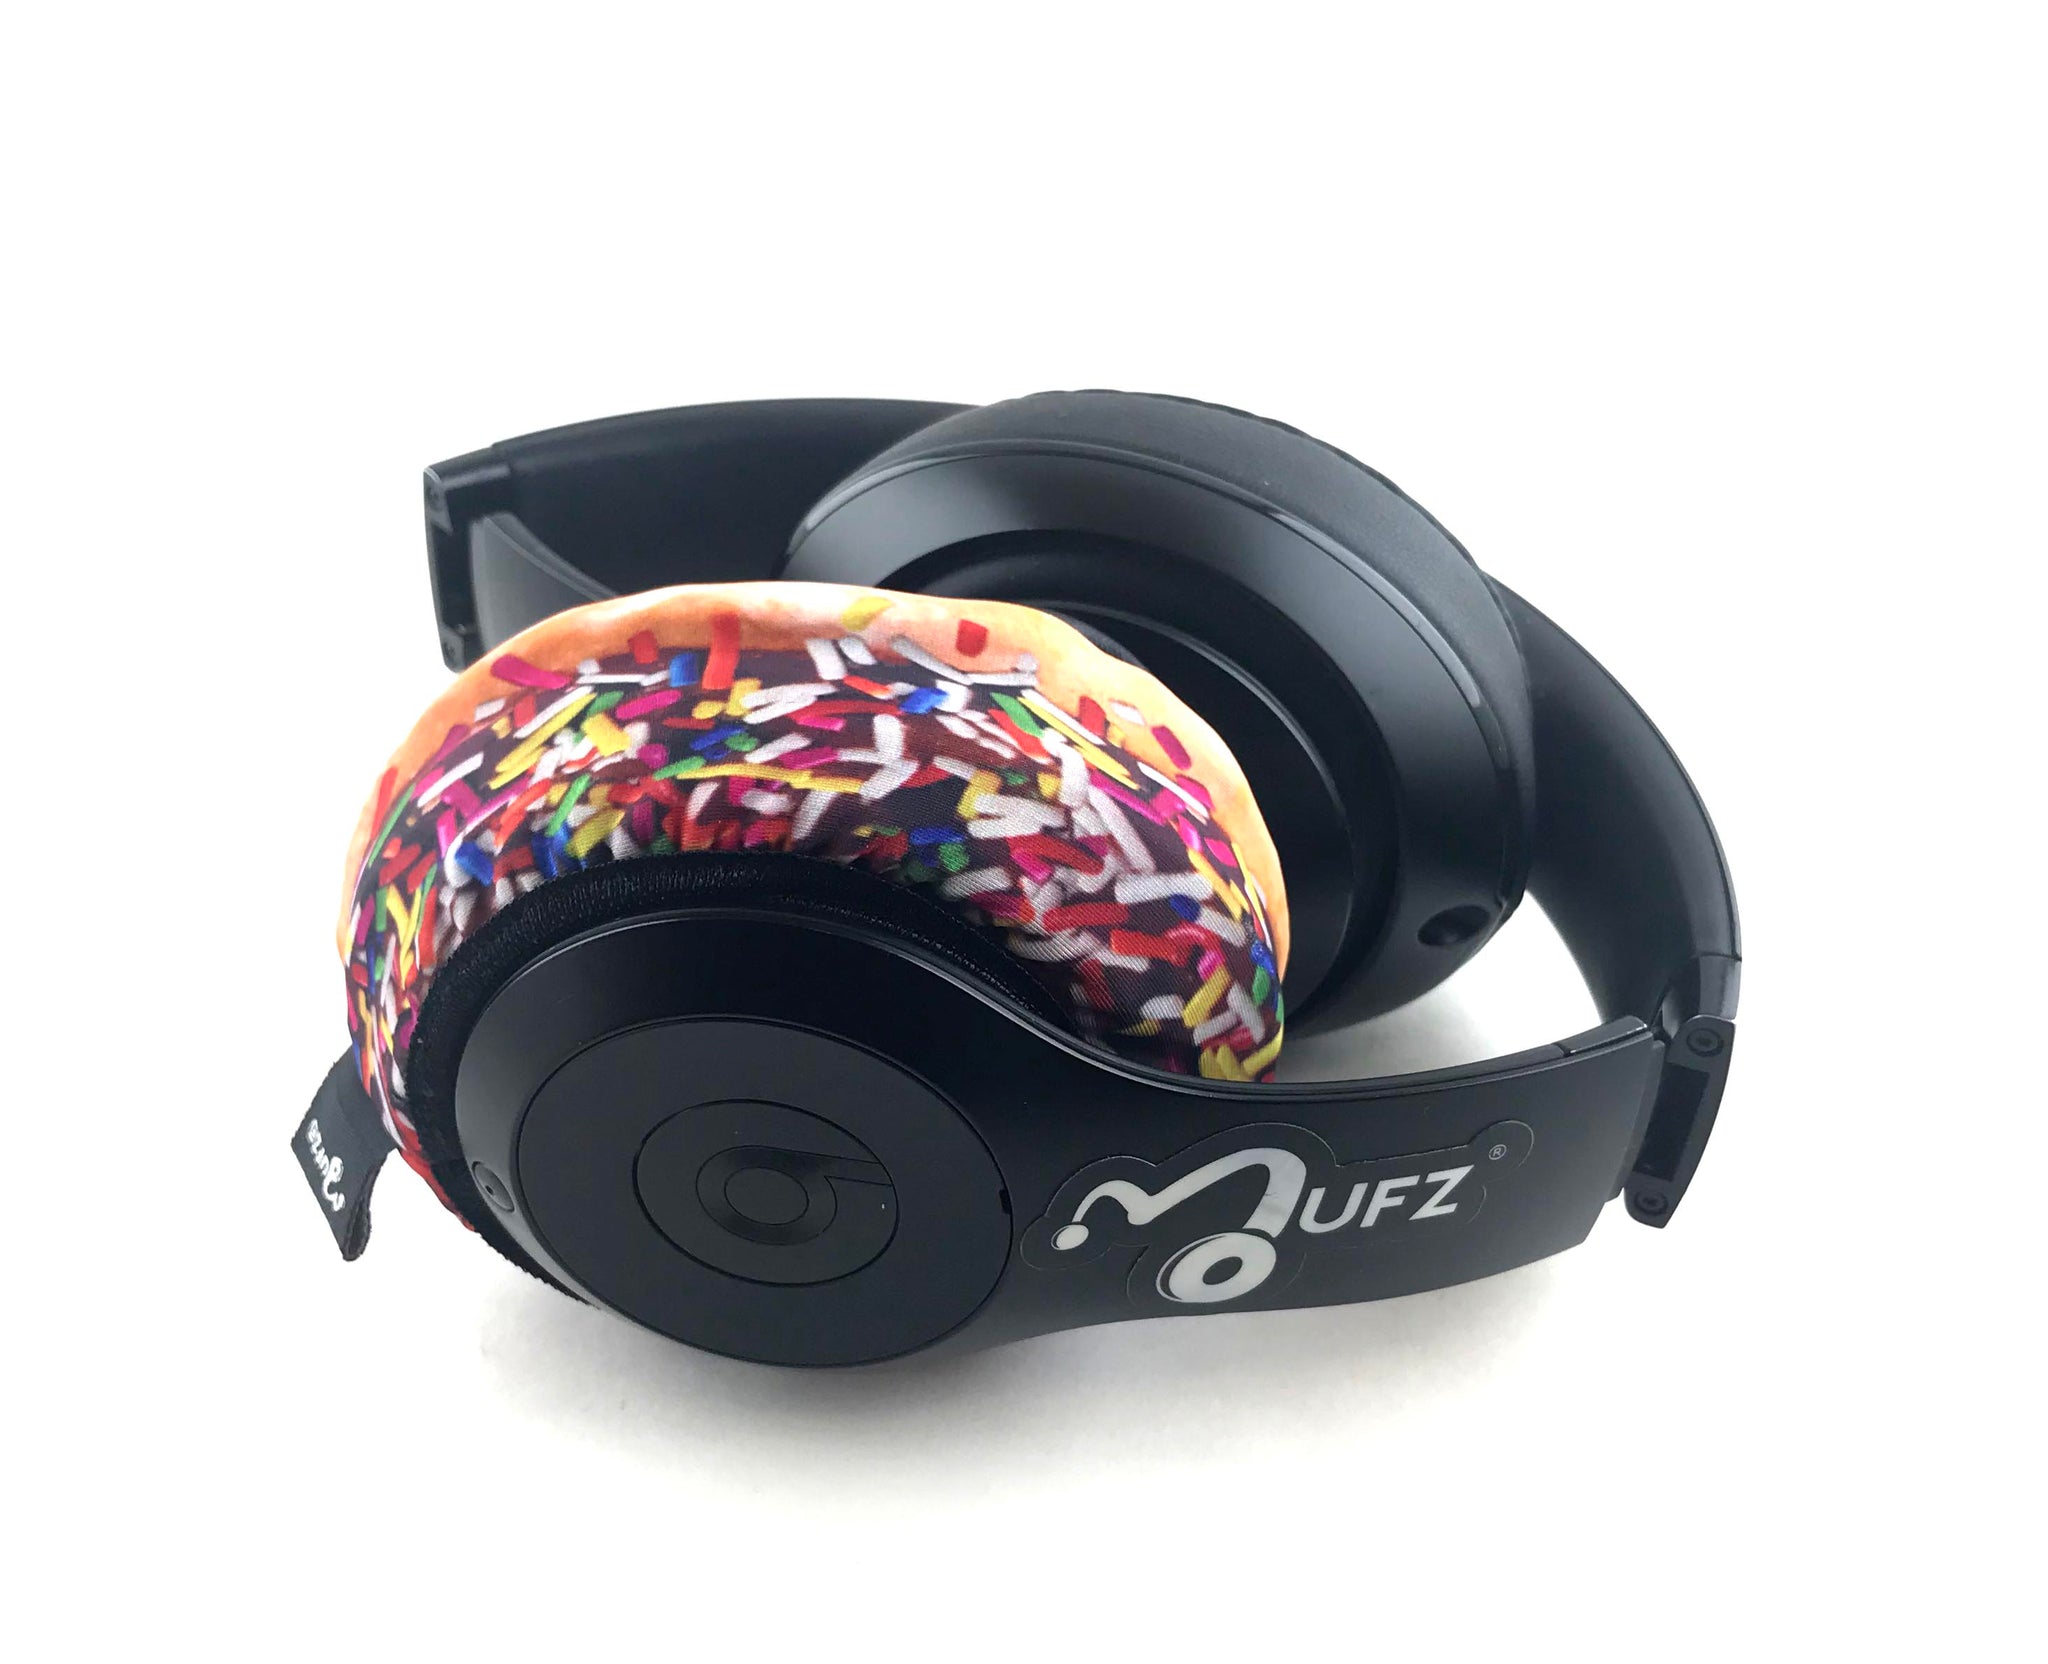 sweat covers for beats